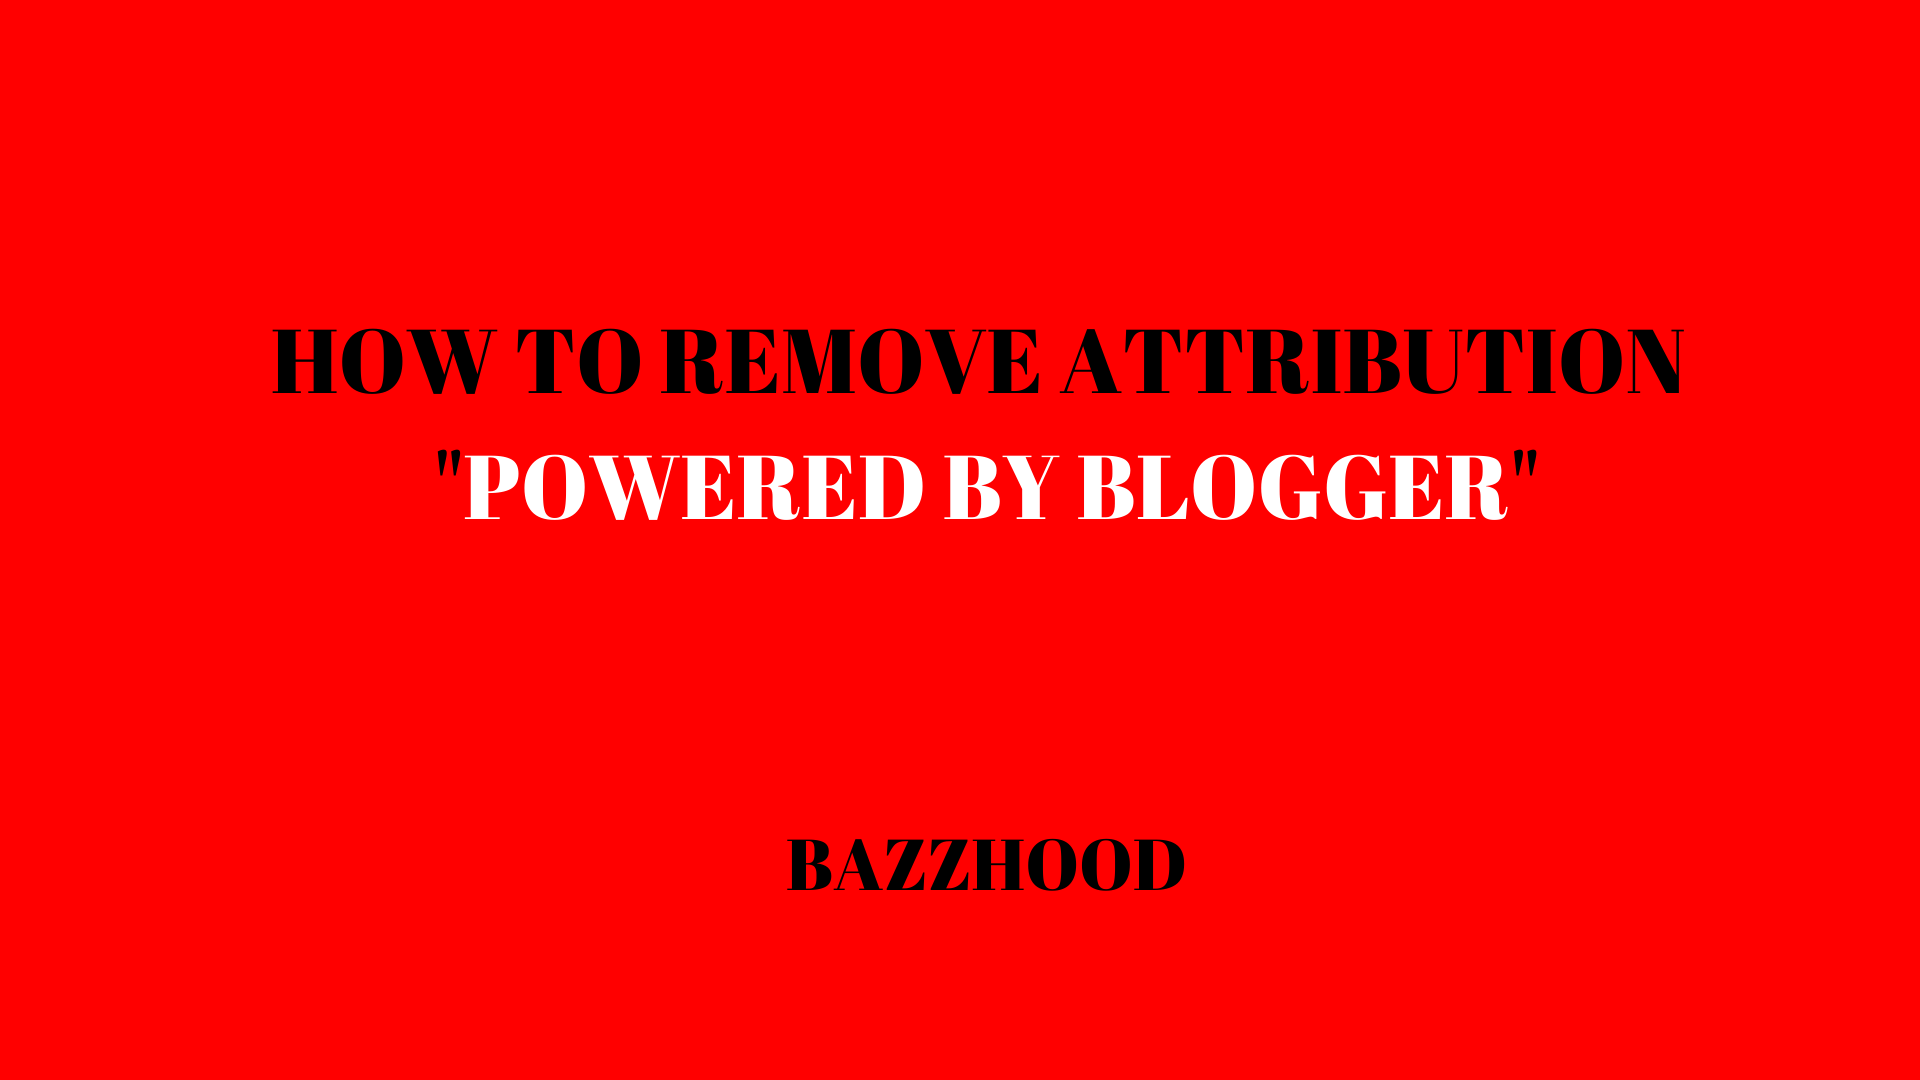 How to Remove Attribution Powered by Blogger